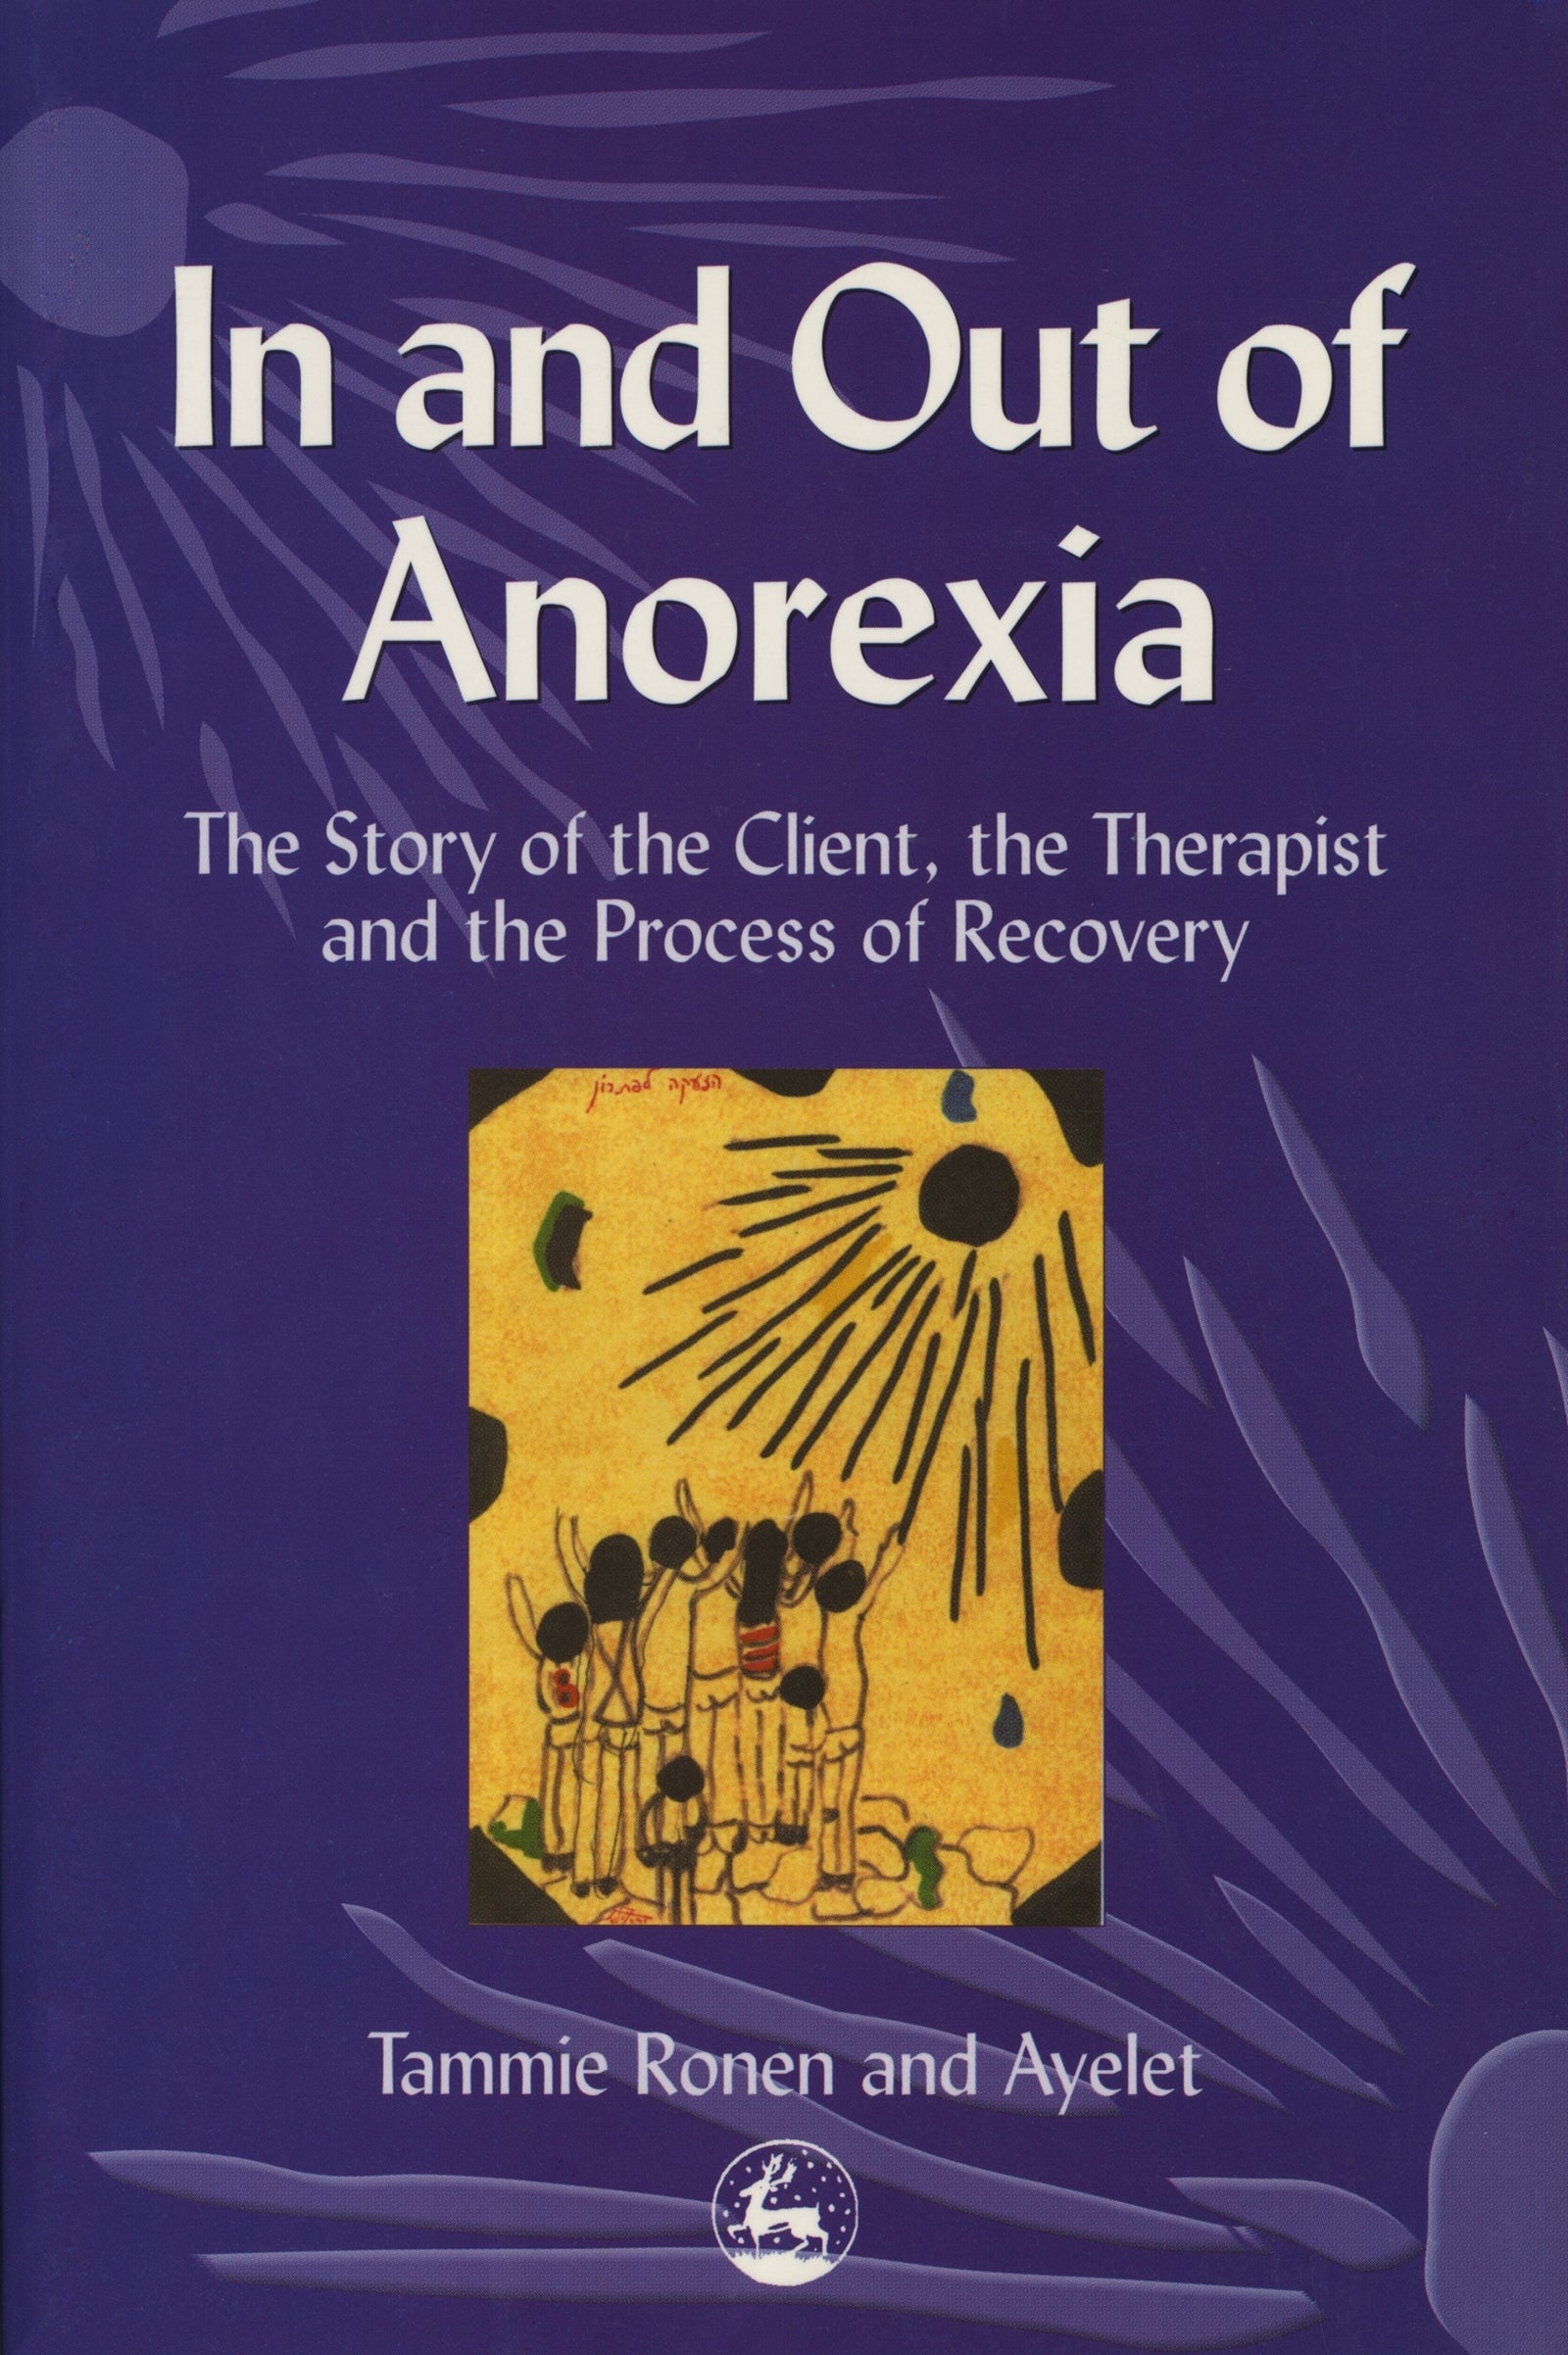 In and Out of Anorexia by Ayelet Polster, Tammie Ronen